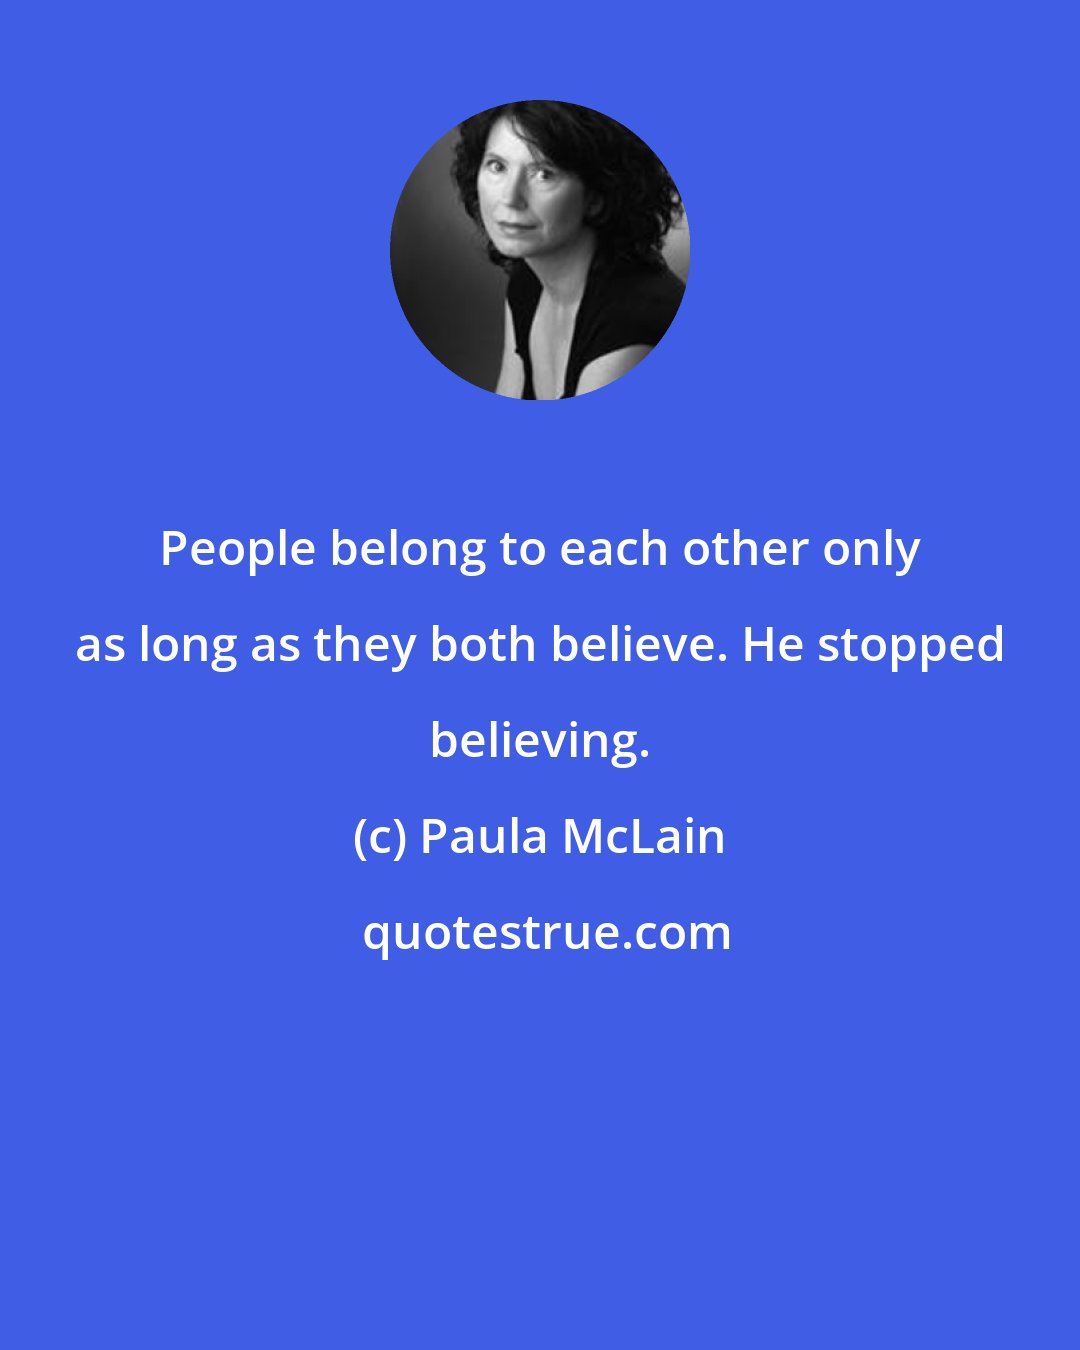 Paula McLain: People belong to each other only as long as they both believe. He stopped believing.